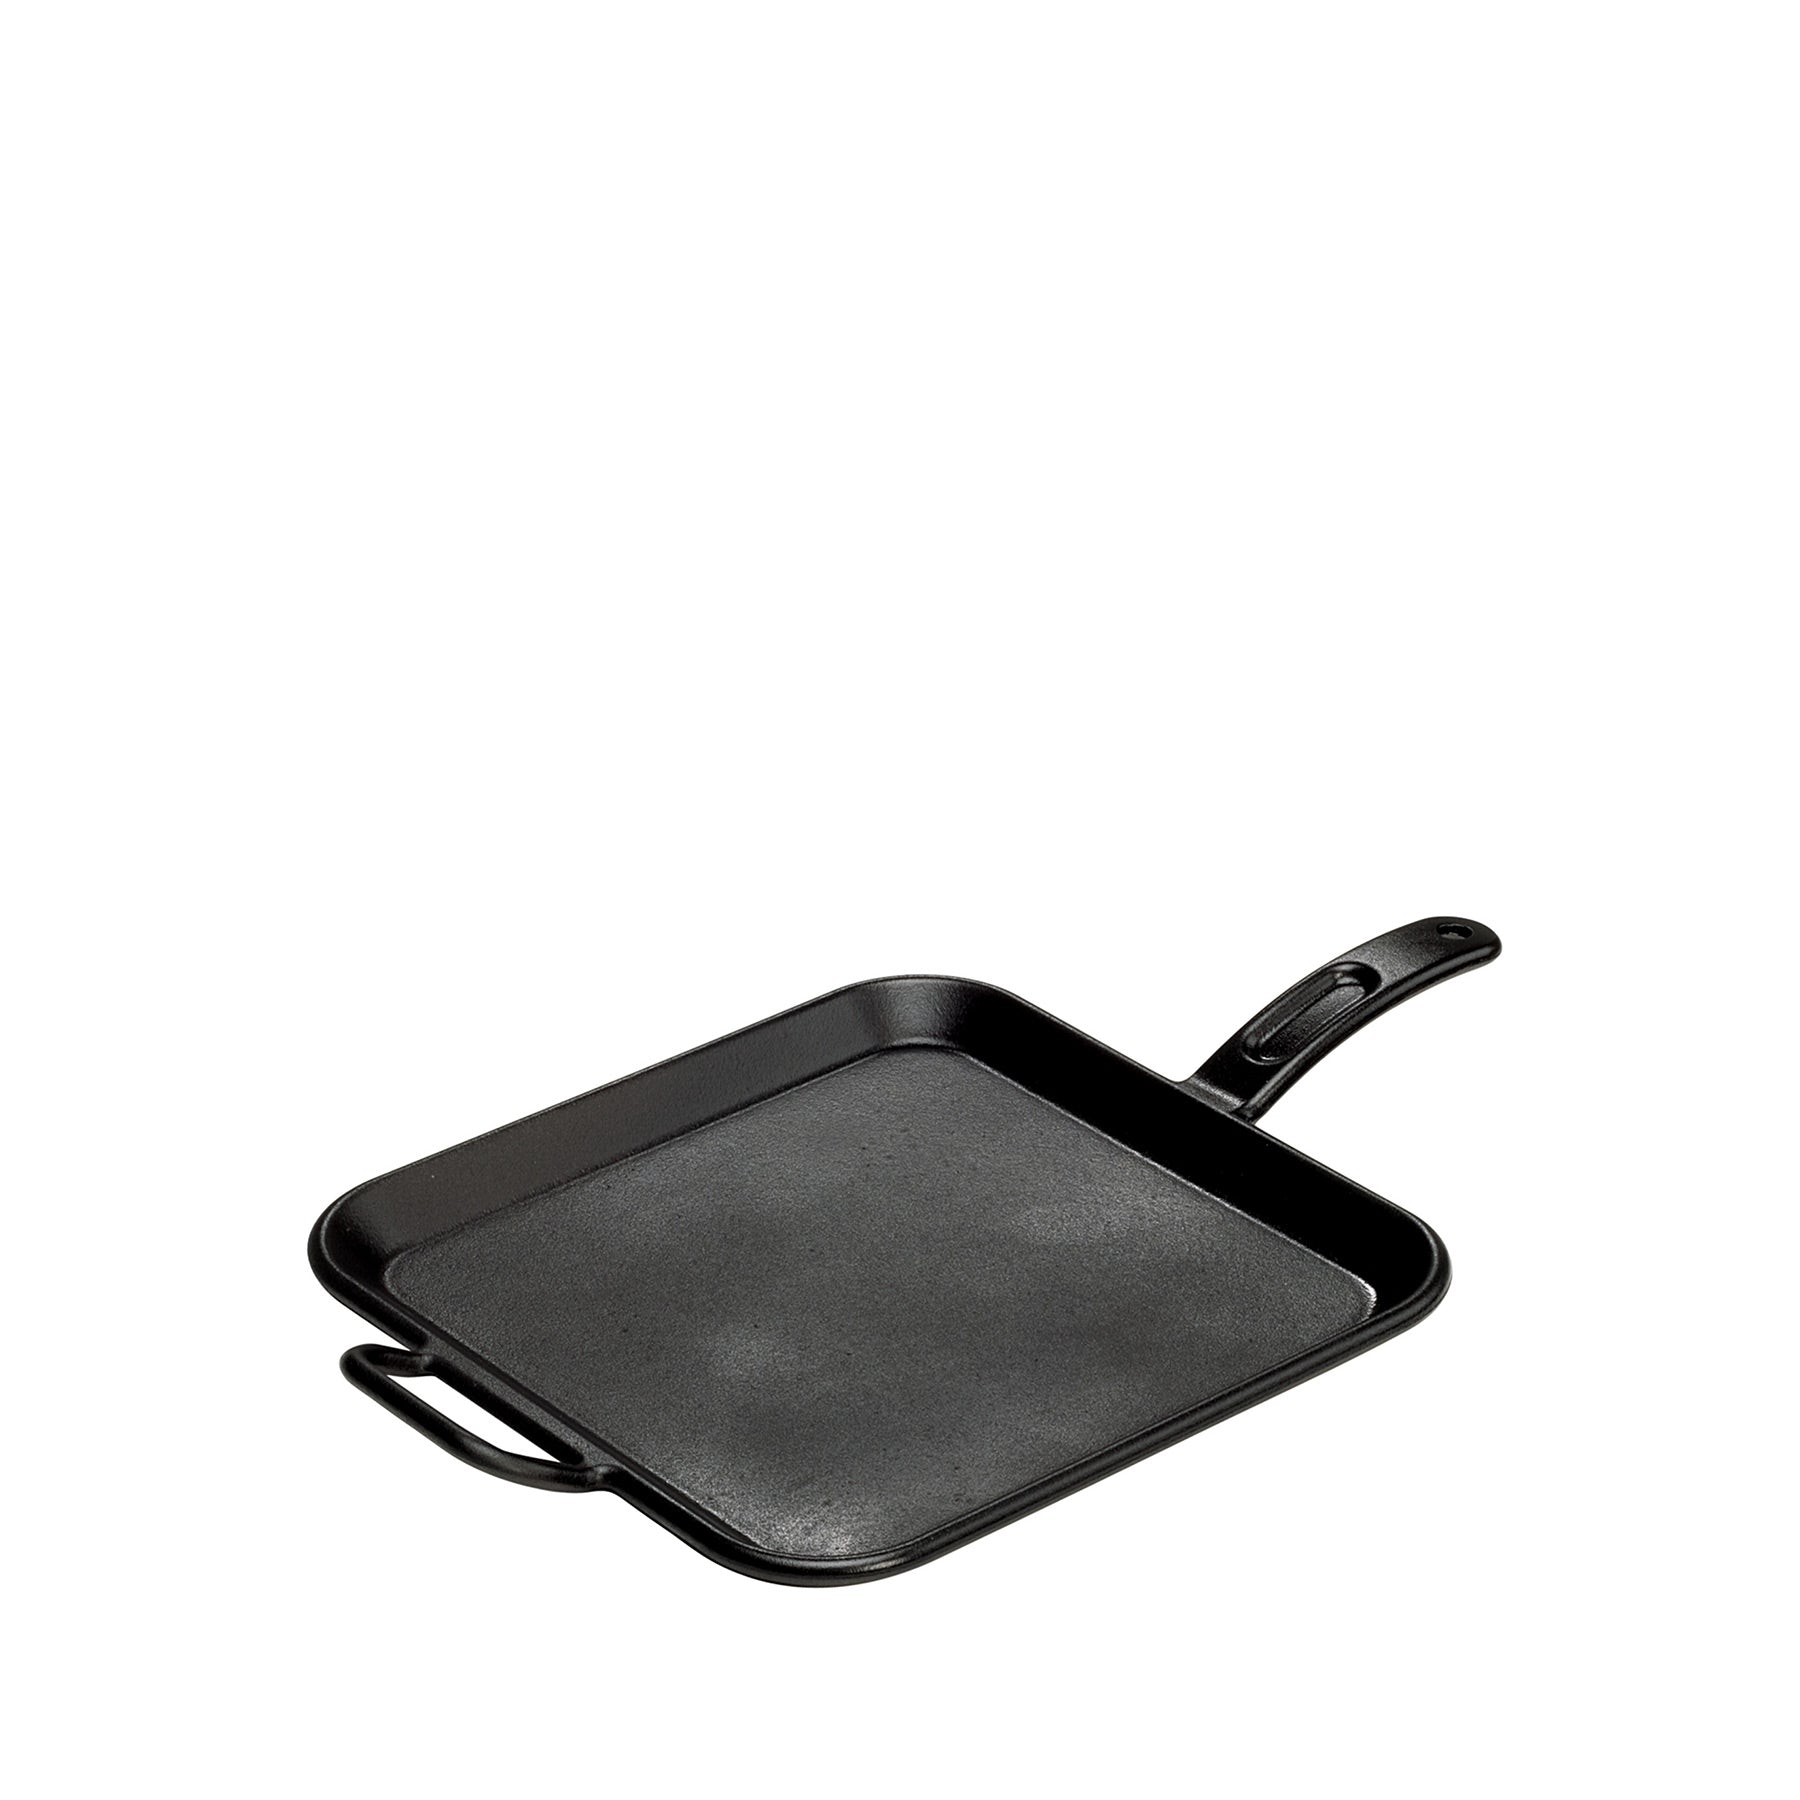 I want to buy a Lodge cast iron skillet but I don't know wich size